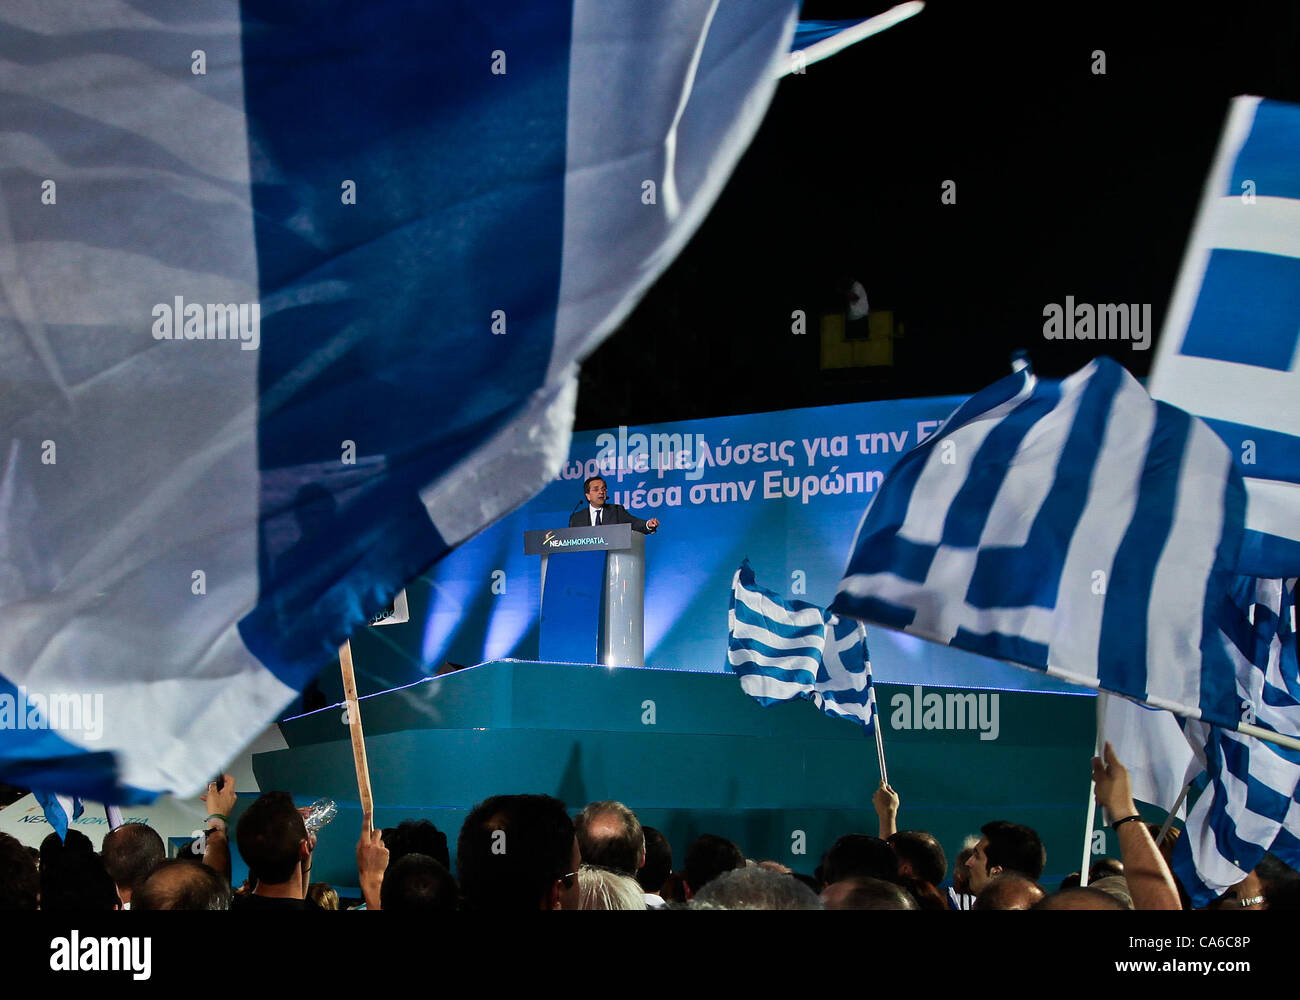 June 16, 2012 - Athens, Greece - New Democracy party leader, Antonis Samaras, delivers a speech in front of the Greek parliament in central Athens on June 15, 2012. As Greece heads for a momentous electoral battle that could decide whether it stays in the eurozone, party leaders are scrambling to re Stock Photo